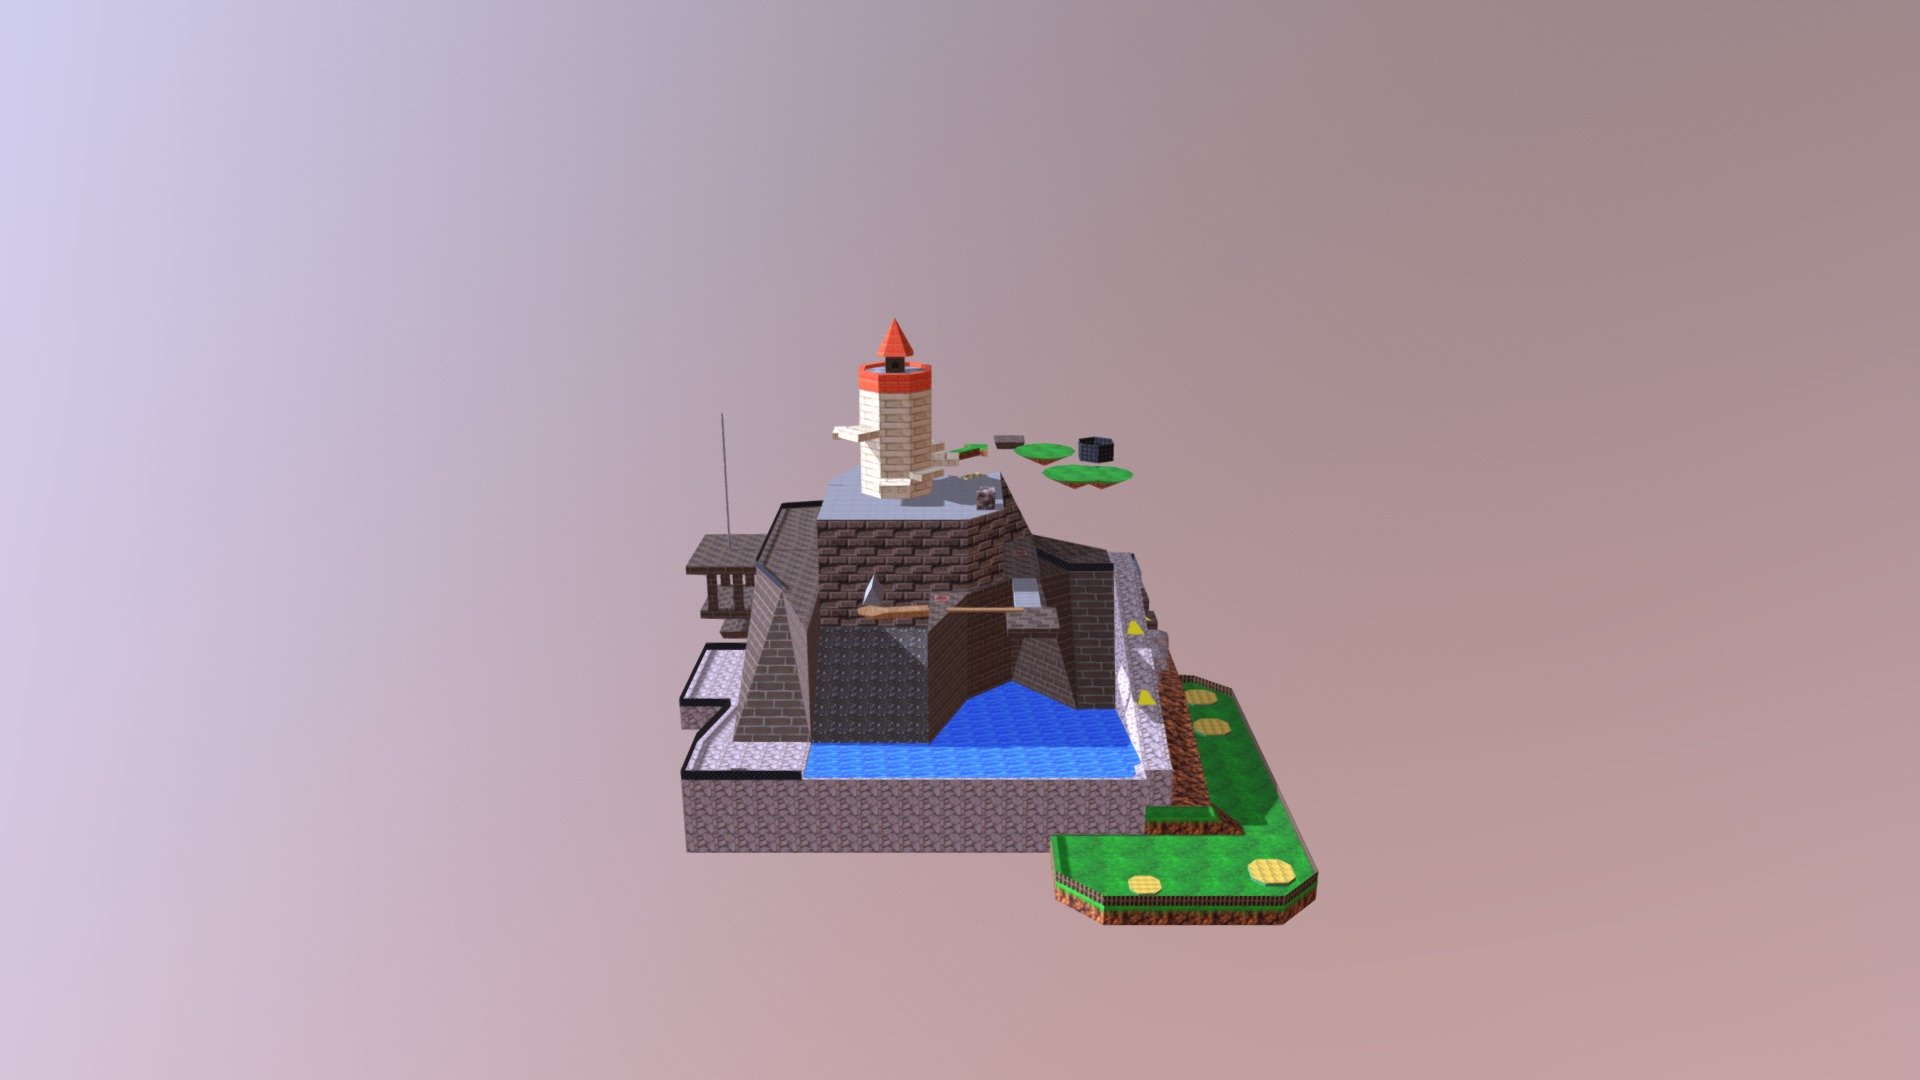 Nintendo 64 Super Mario 64 Whomps Fortress 3d Model By Urchinflaky 861002a Sketchfab 1947